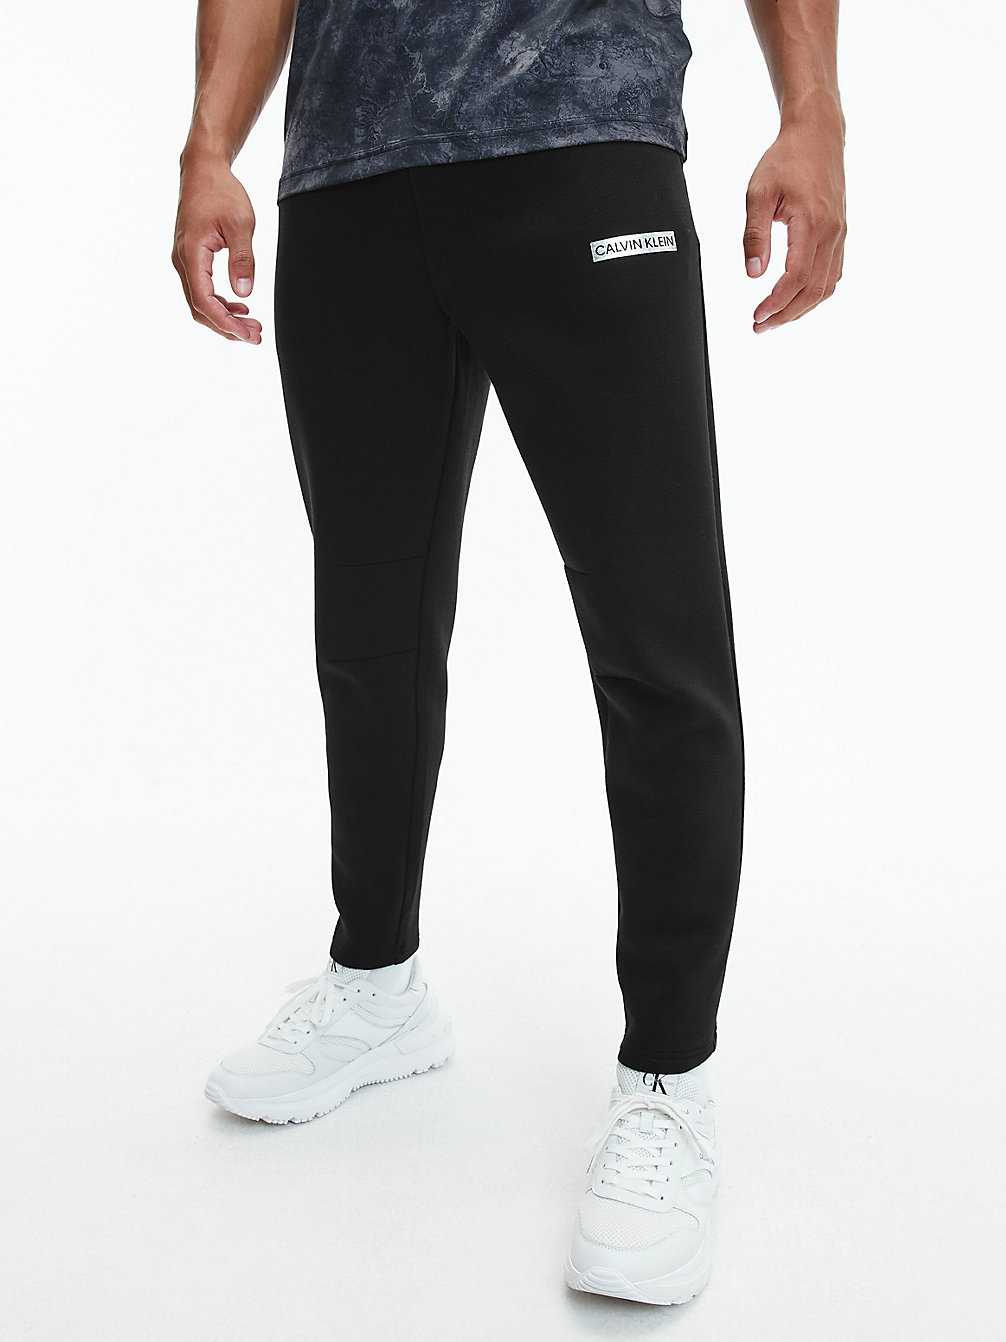 CK BLACK/BLACKENED PEARL Tapered Joggers undefined men Calvin Klein